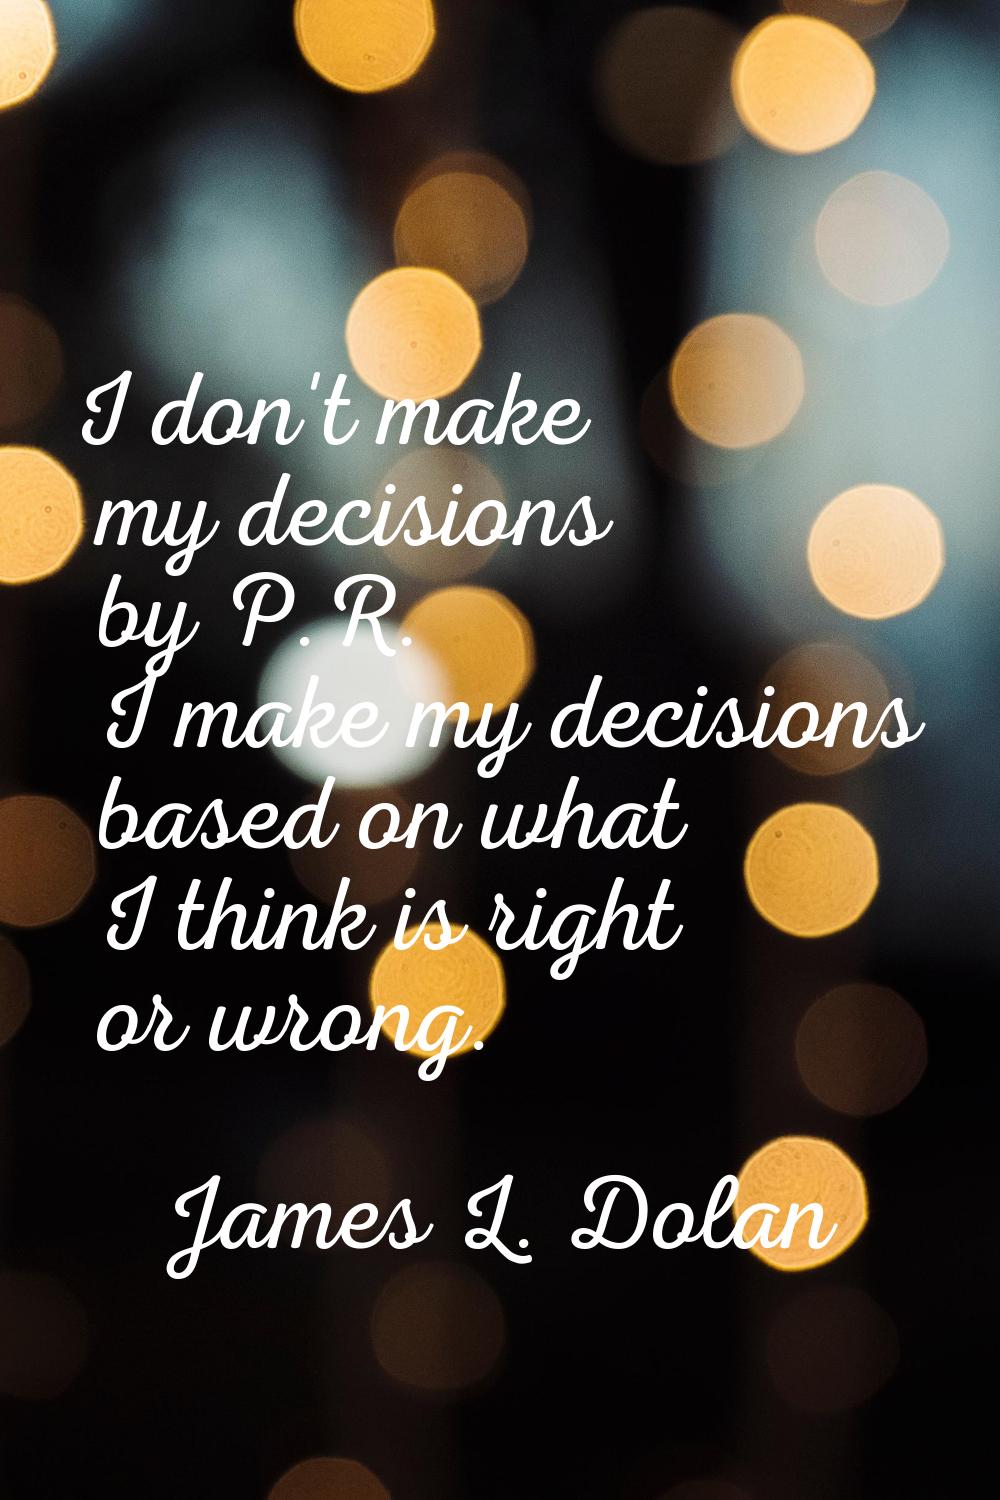 I don't make my decisions by P.R. I make my decisions based on what I think is right or wrong.